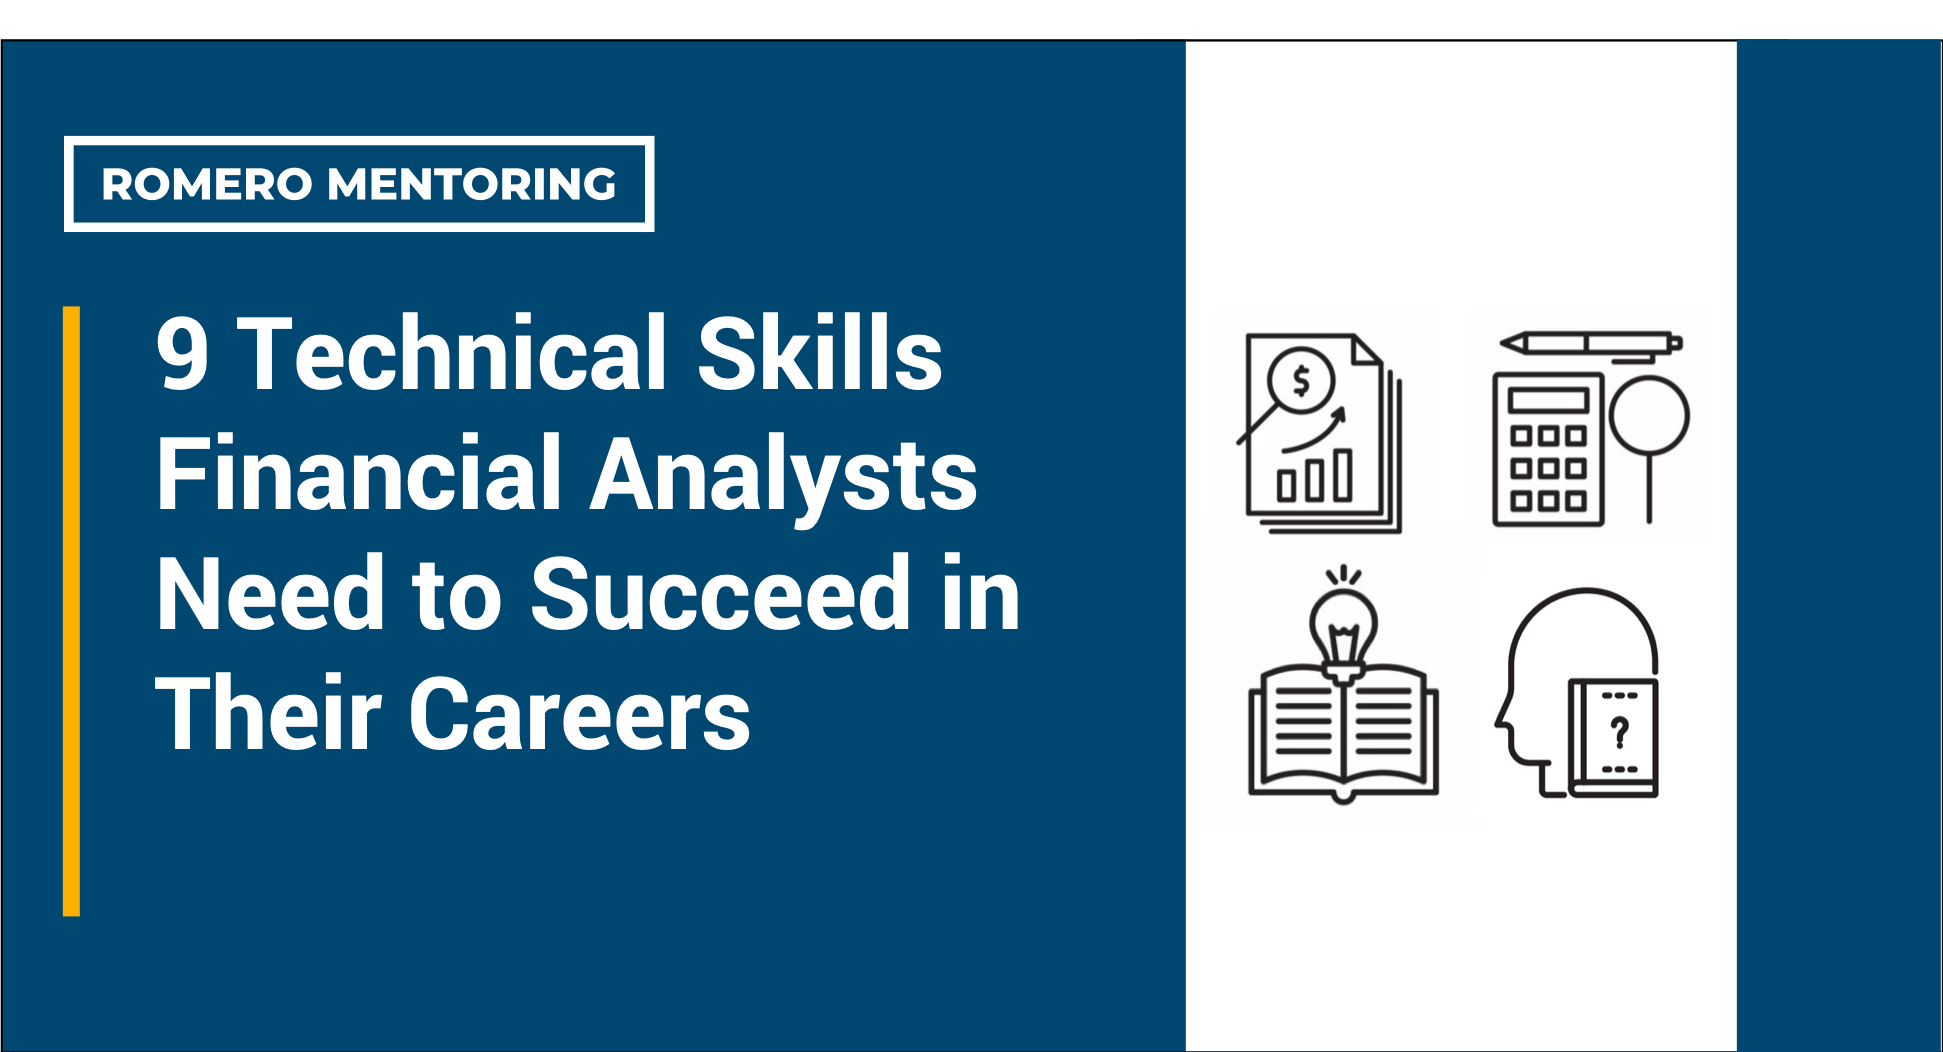 9 Technical Skills Financial Analysts Need to Succeed in Their Careers